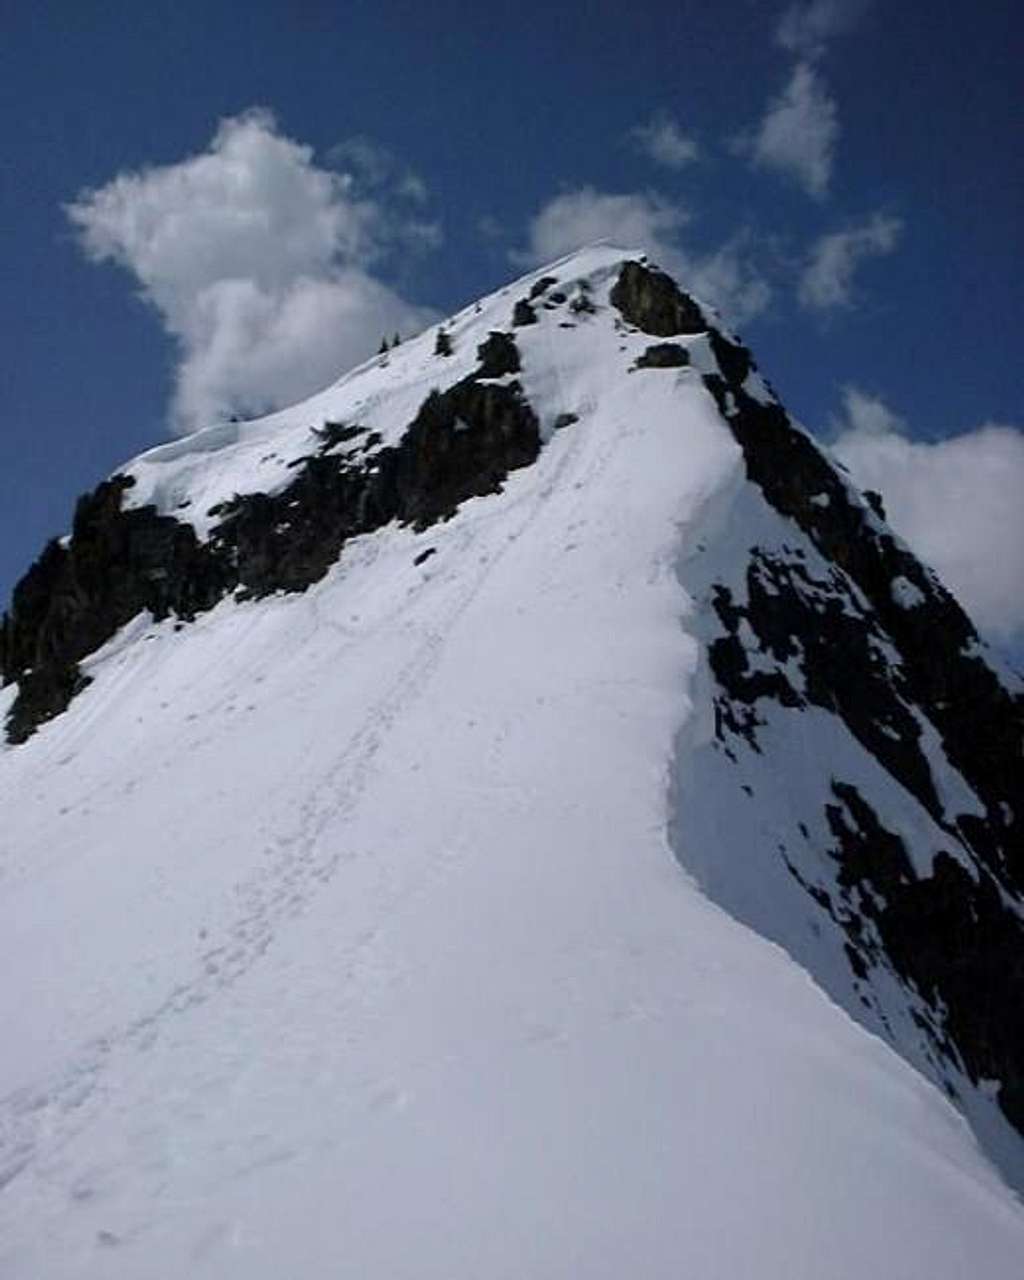 Looking up at the summit of...